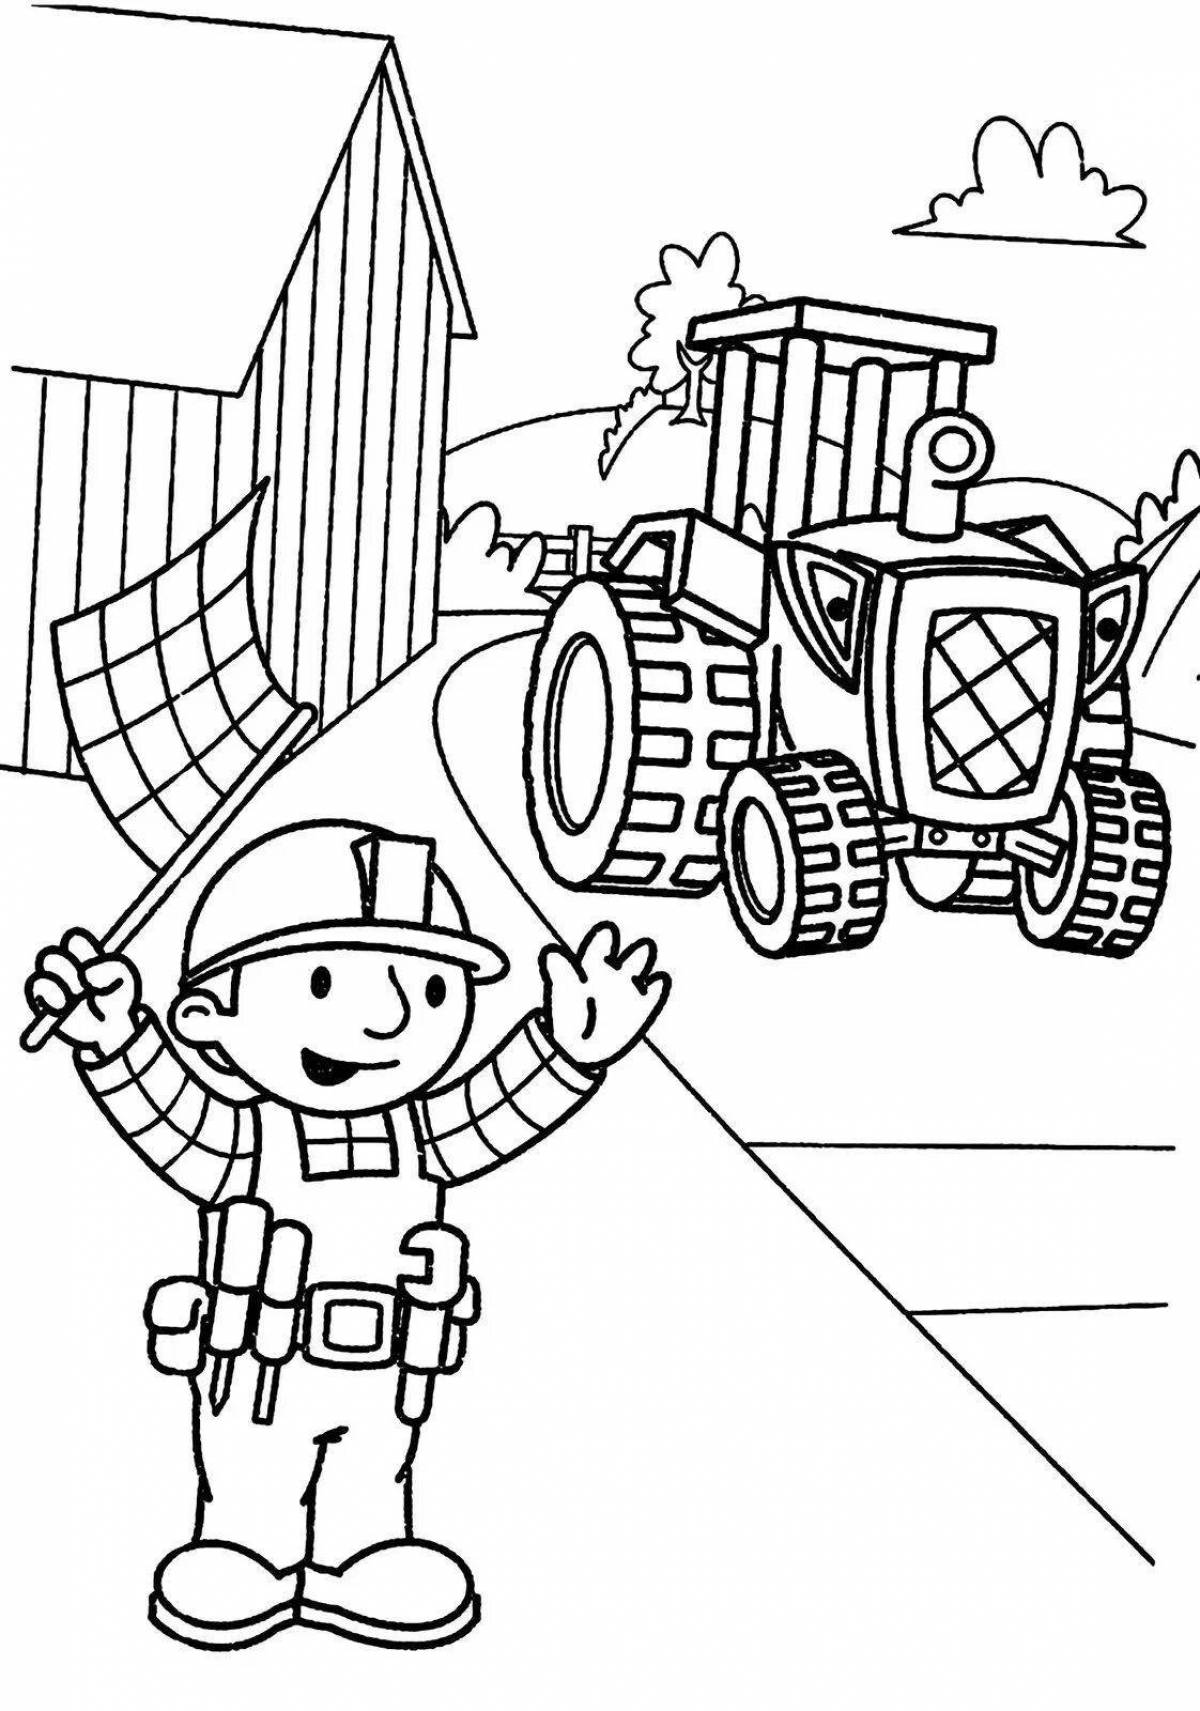 Occupational safety and health creative coloring page